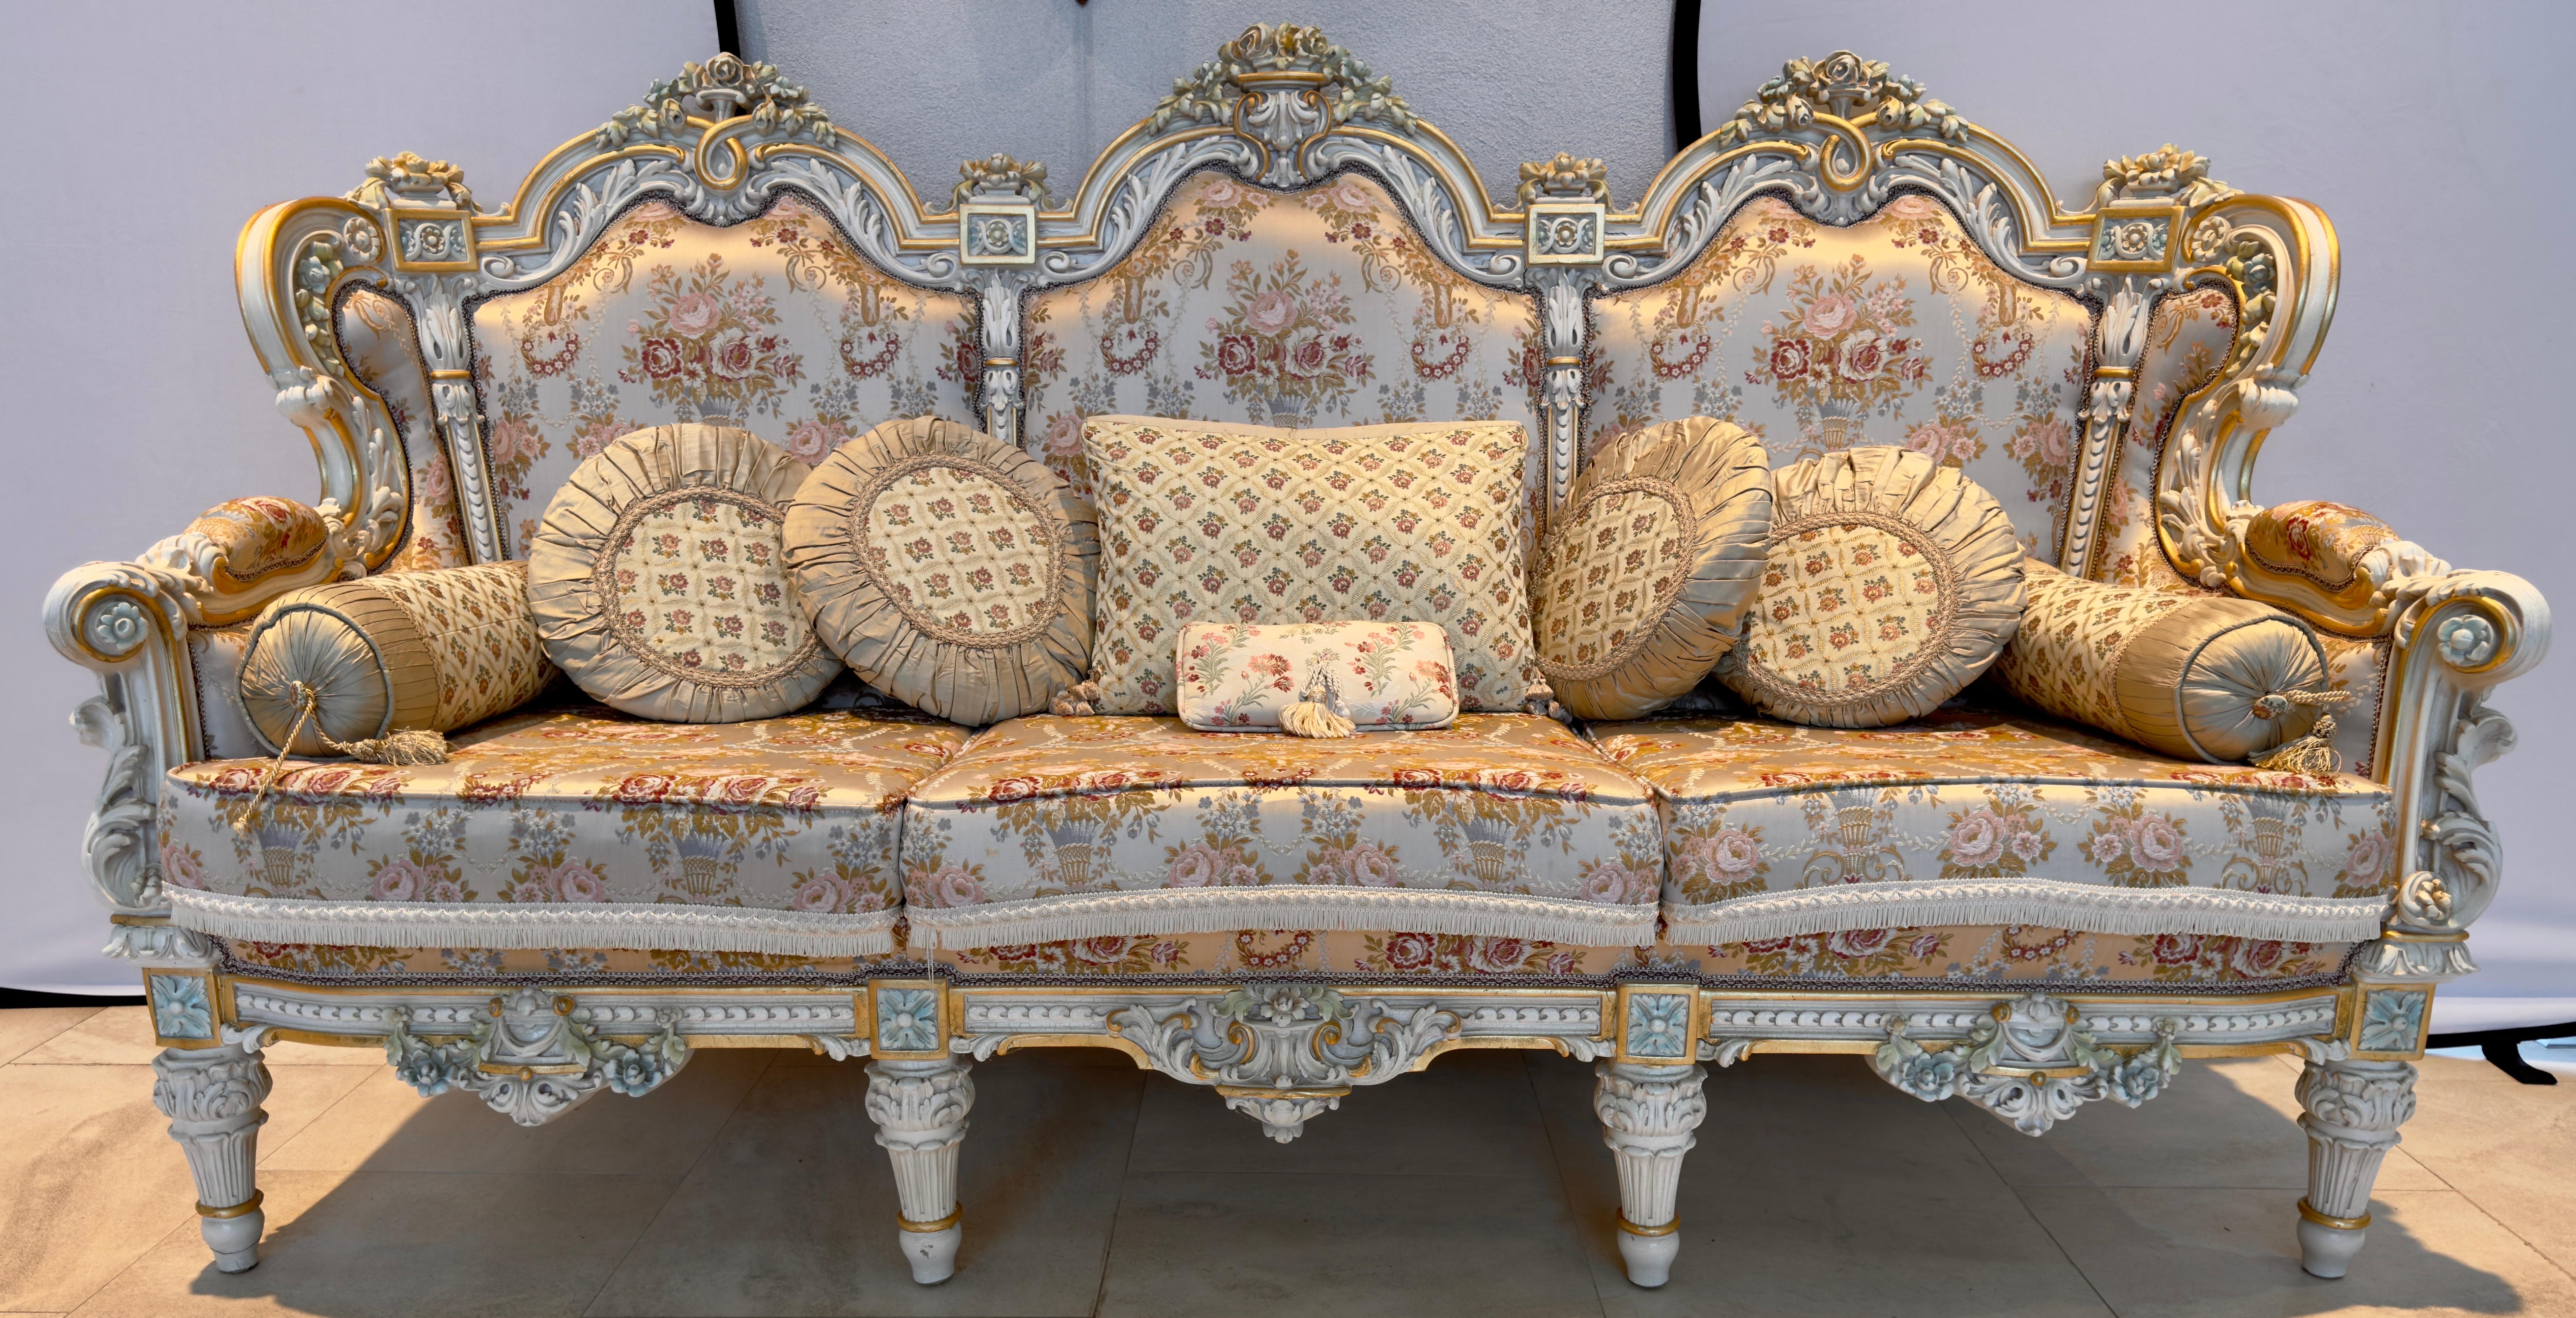 Italian Neoclassical Baroque Style Sofa with fine floral silk upholstery  For Sale 3